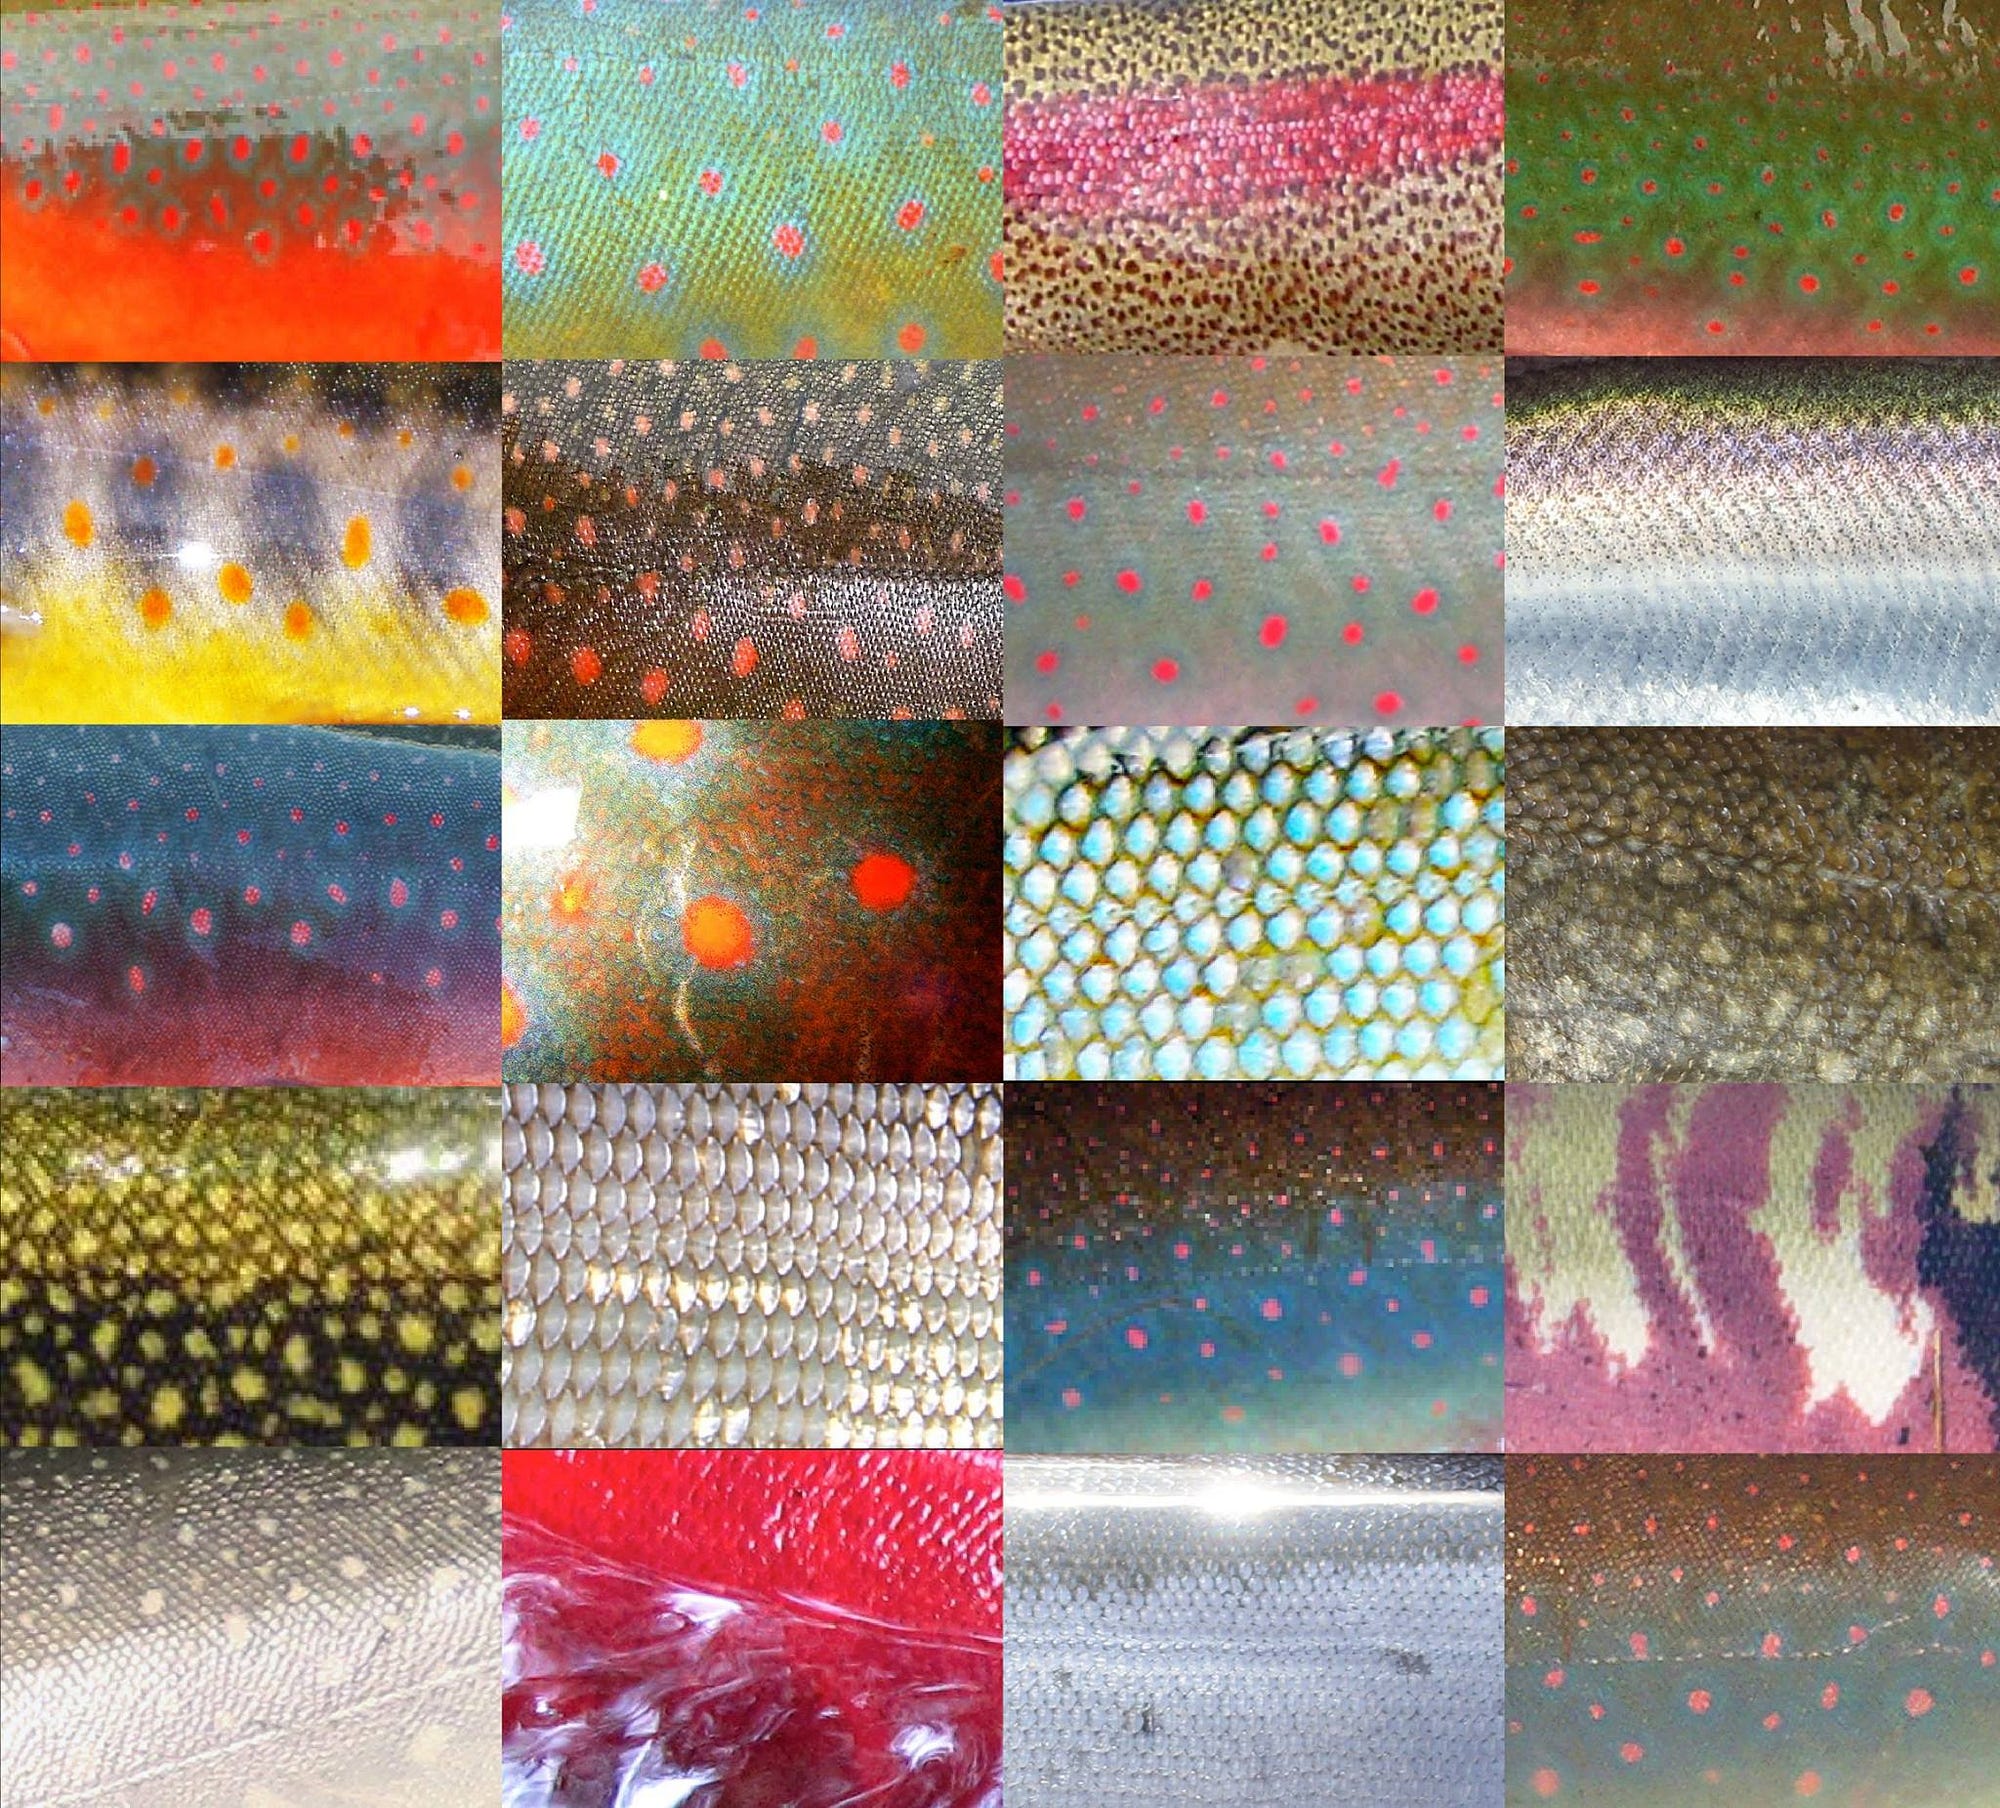 The Beauty of Fish Scales. Fish are absolutely beautiful. There